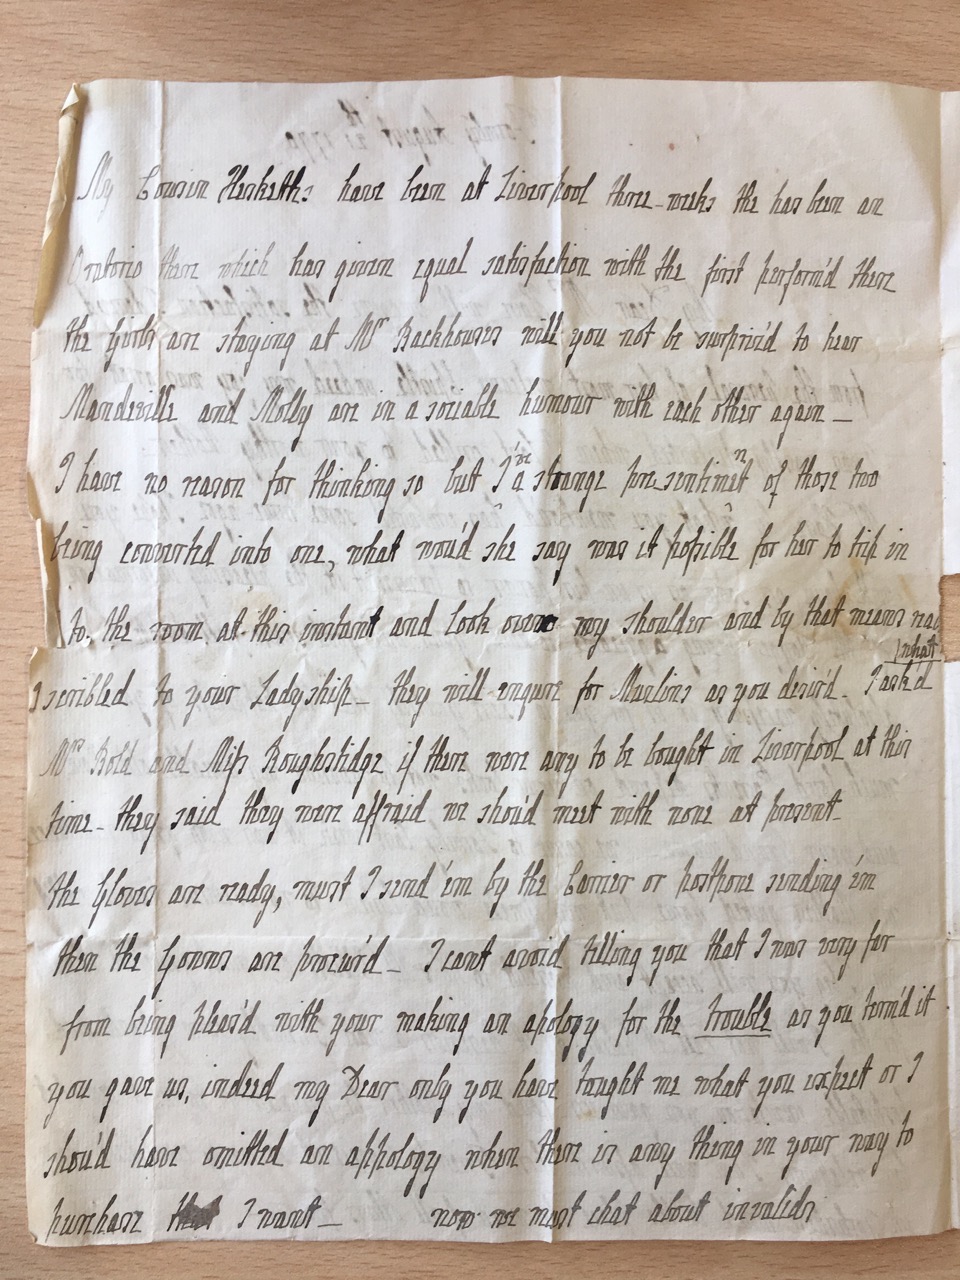 Image #2 of letter: J[enny] Brownsword to Ann Hare, 21 August 1770